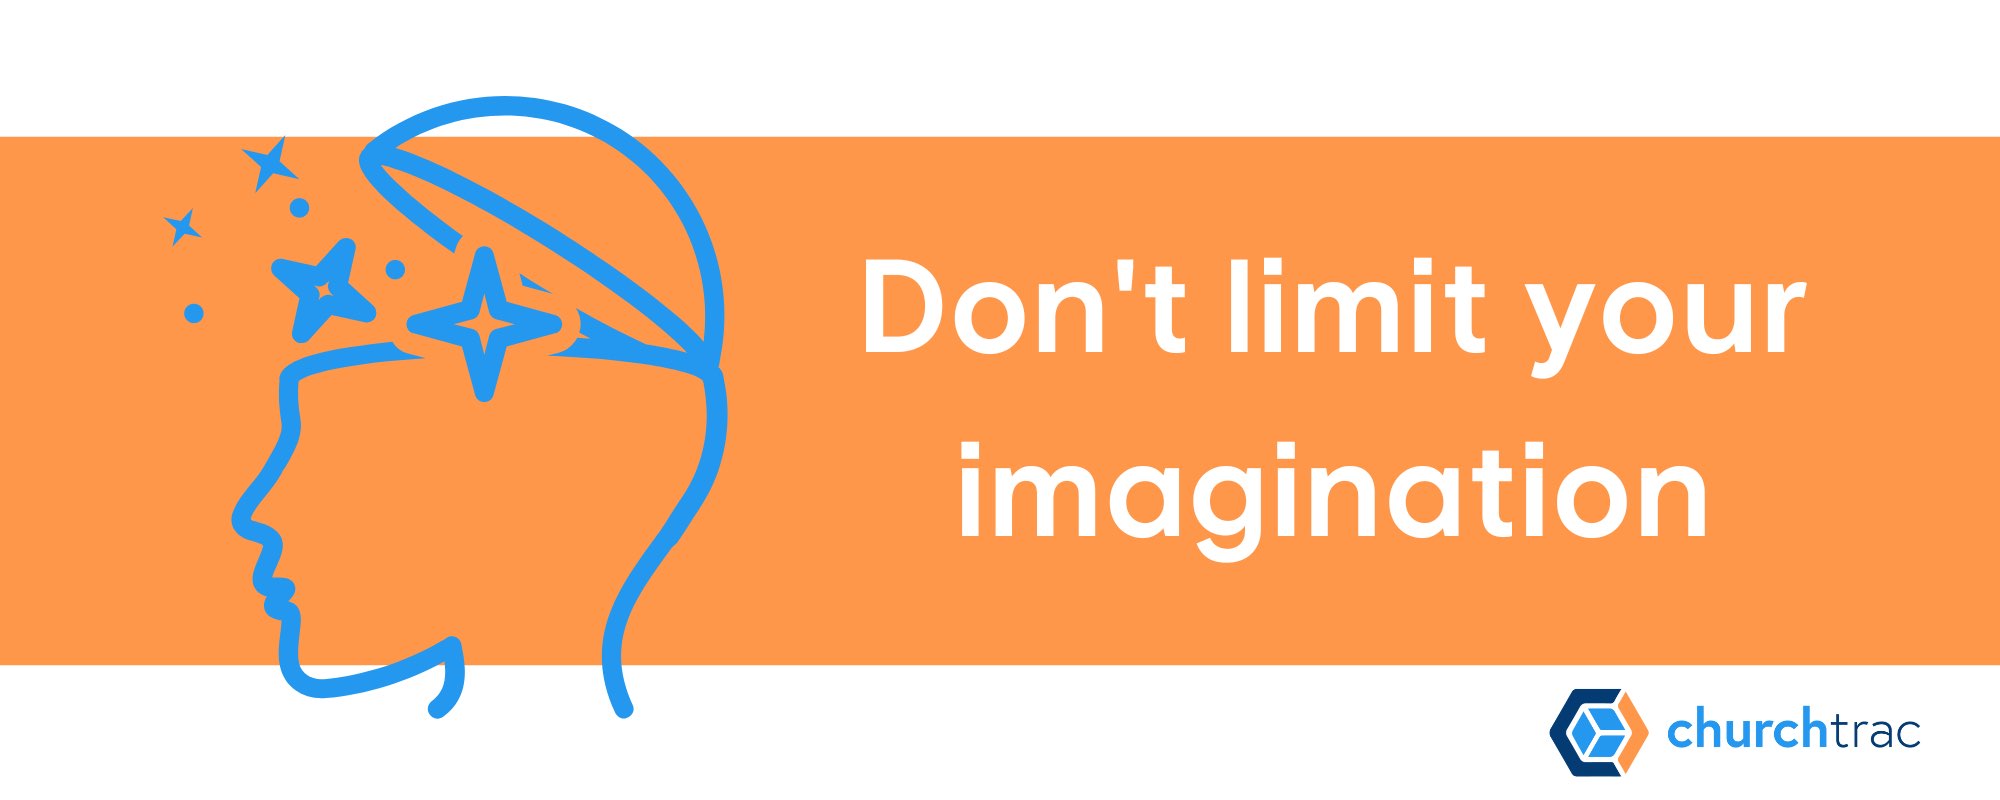 Don't let your limitations kill your imagination for an example of a church outreach event